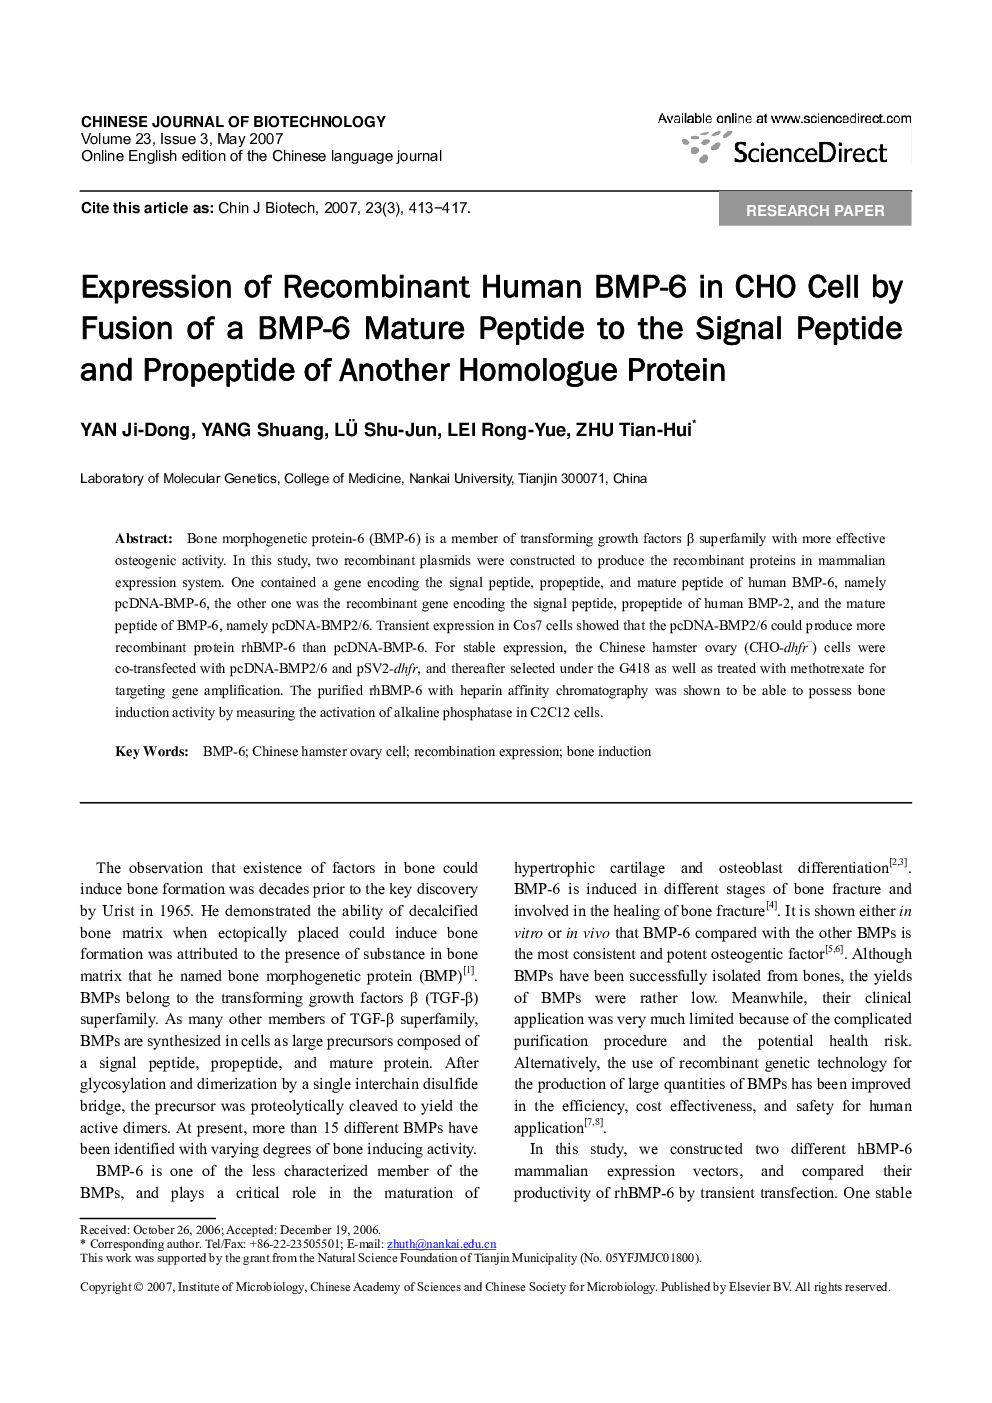 Expression of Recombinant Human BMP-6 in CHO Cell by Fusion of a BMP-6 Mature Peptide to the Signal Peptide and Propeptide of Another Homologue Protein